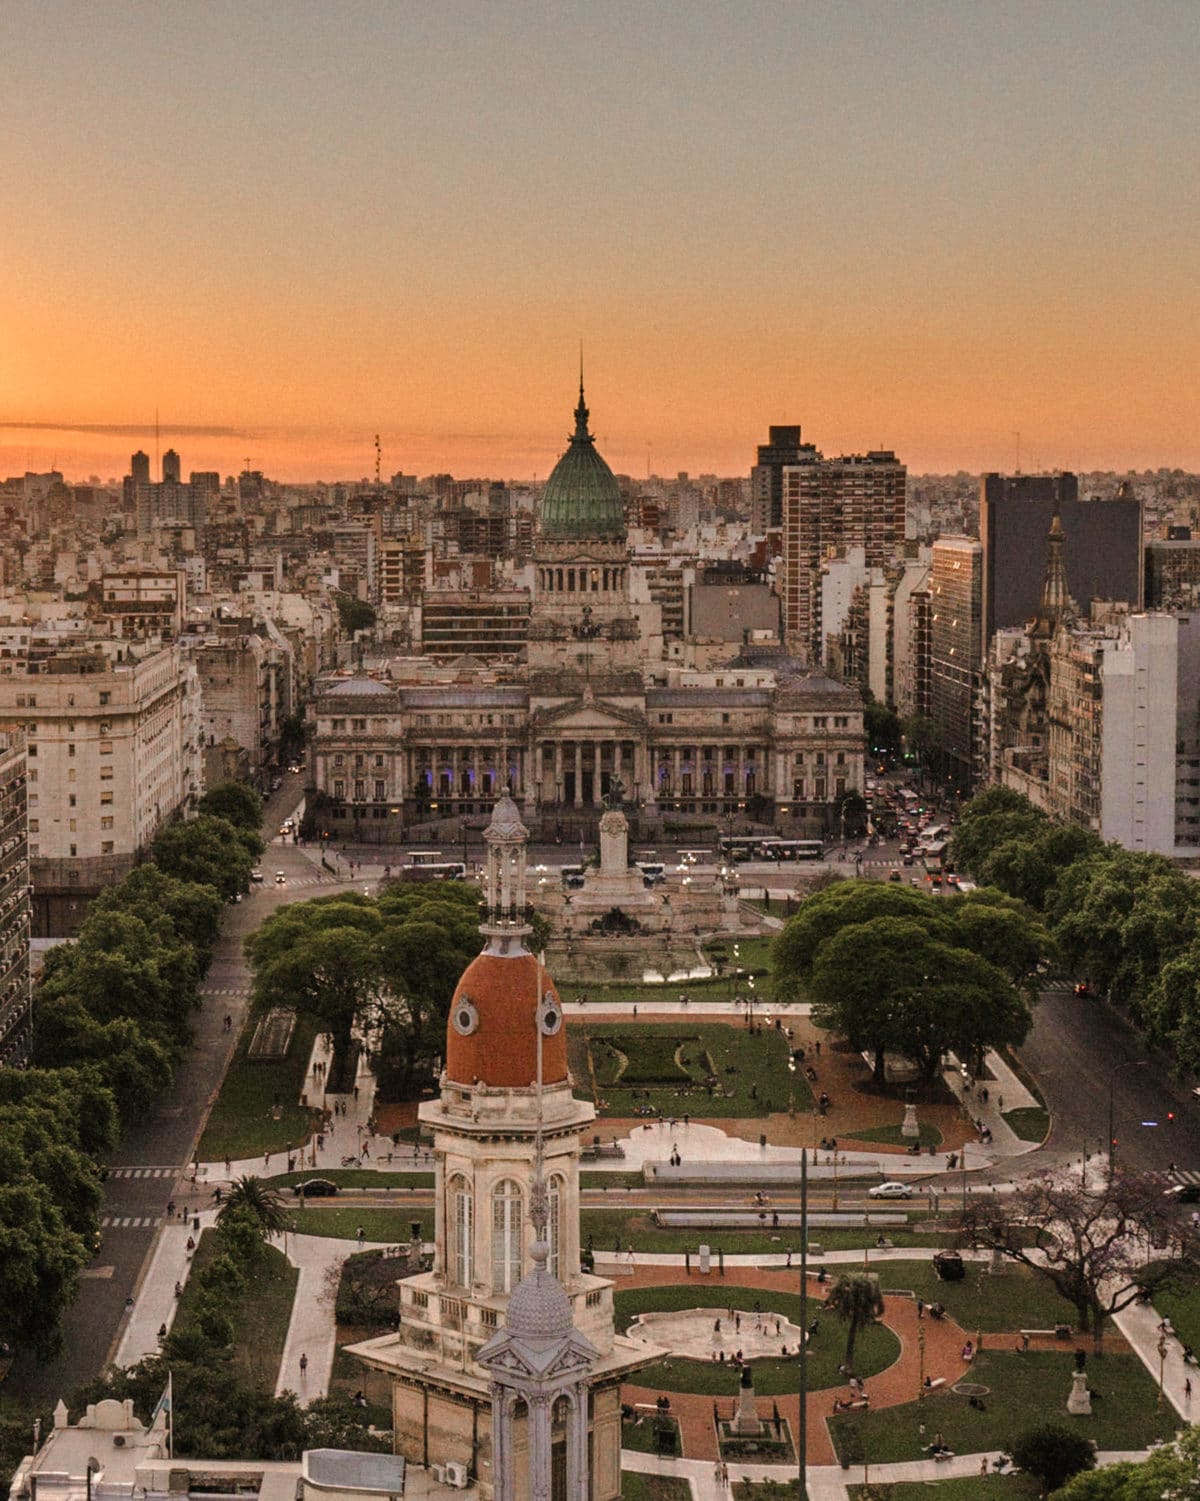 What to Expect on a Two Week Unsettled Retreat - Buenos Aires Edition